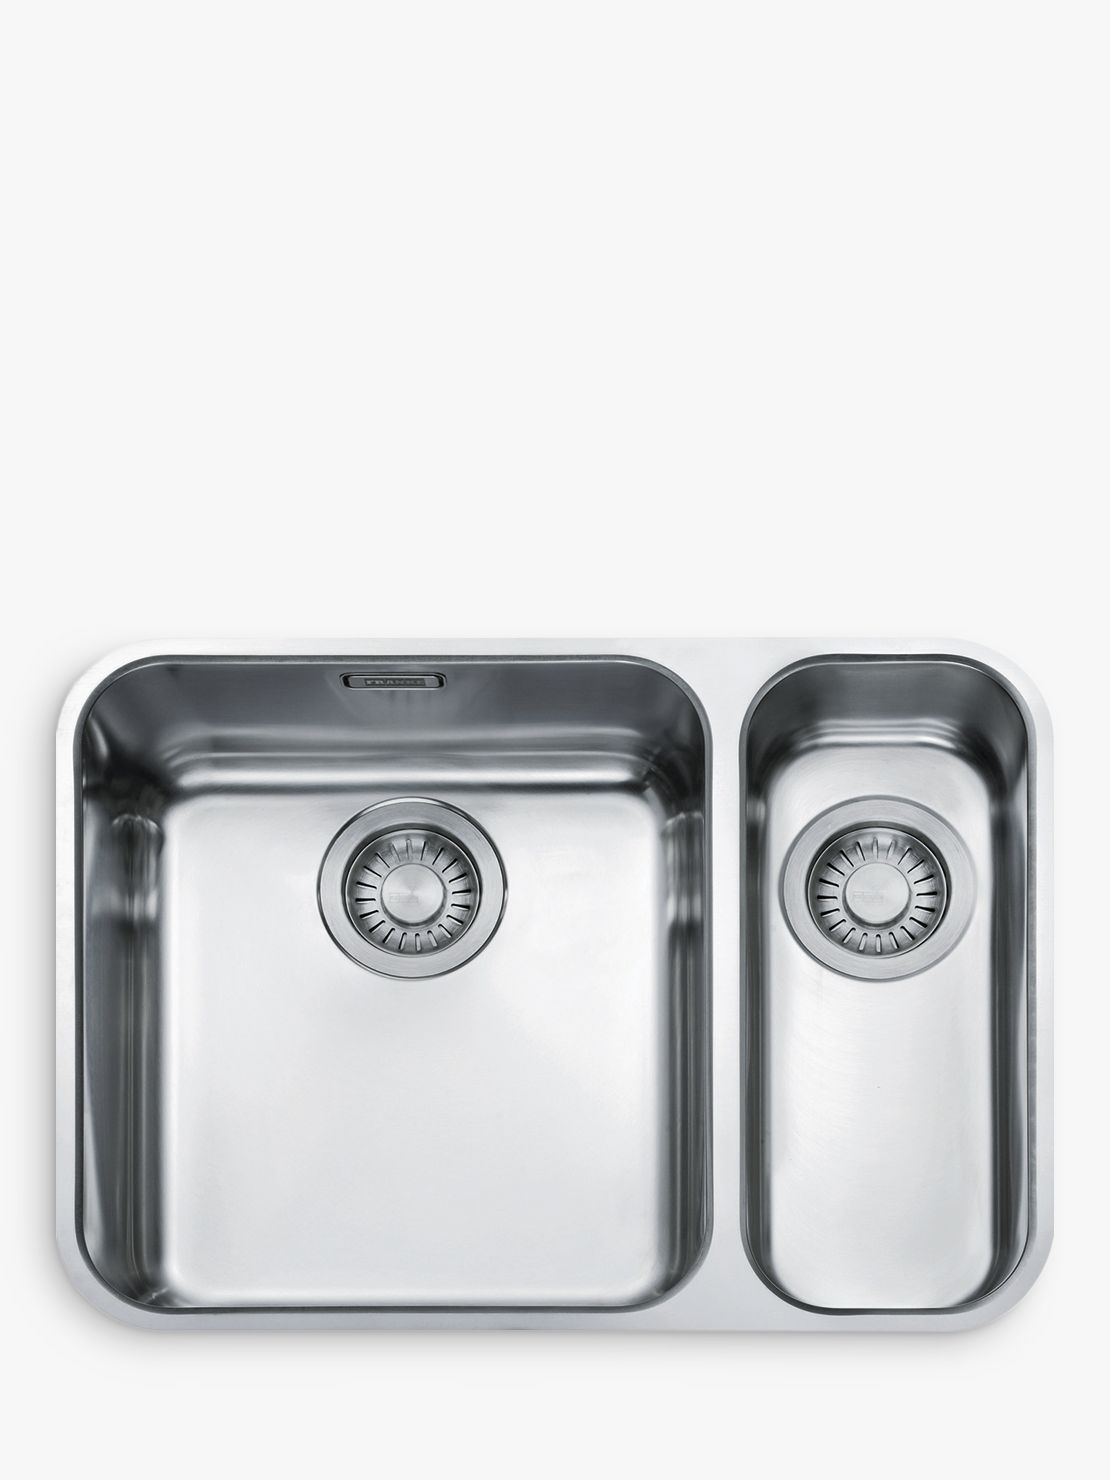 Franke Largo Lax 160 36 16 Undermounted 1 5 Bowl Kitchen Sink With Left Hand Bowl Stainless Steel